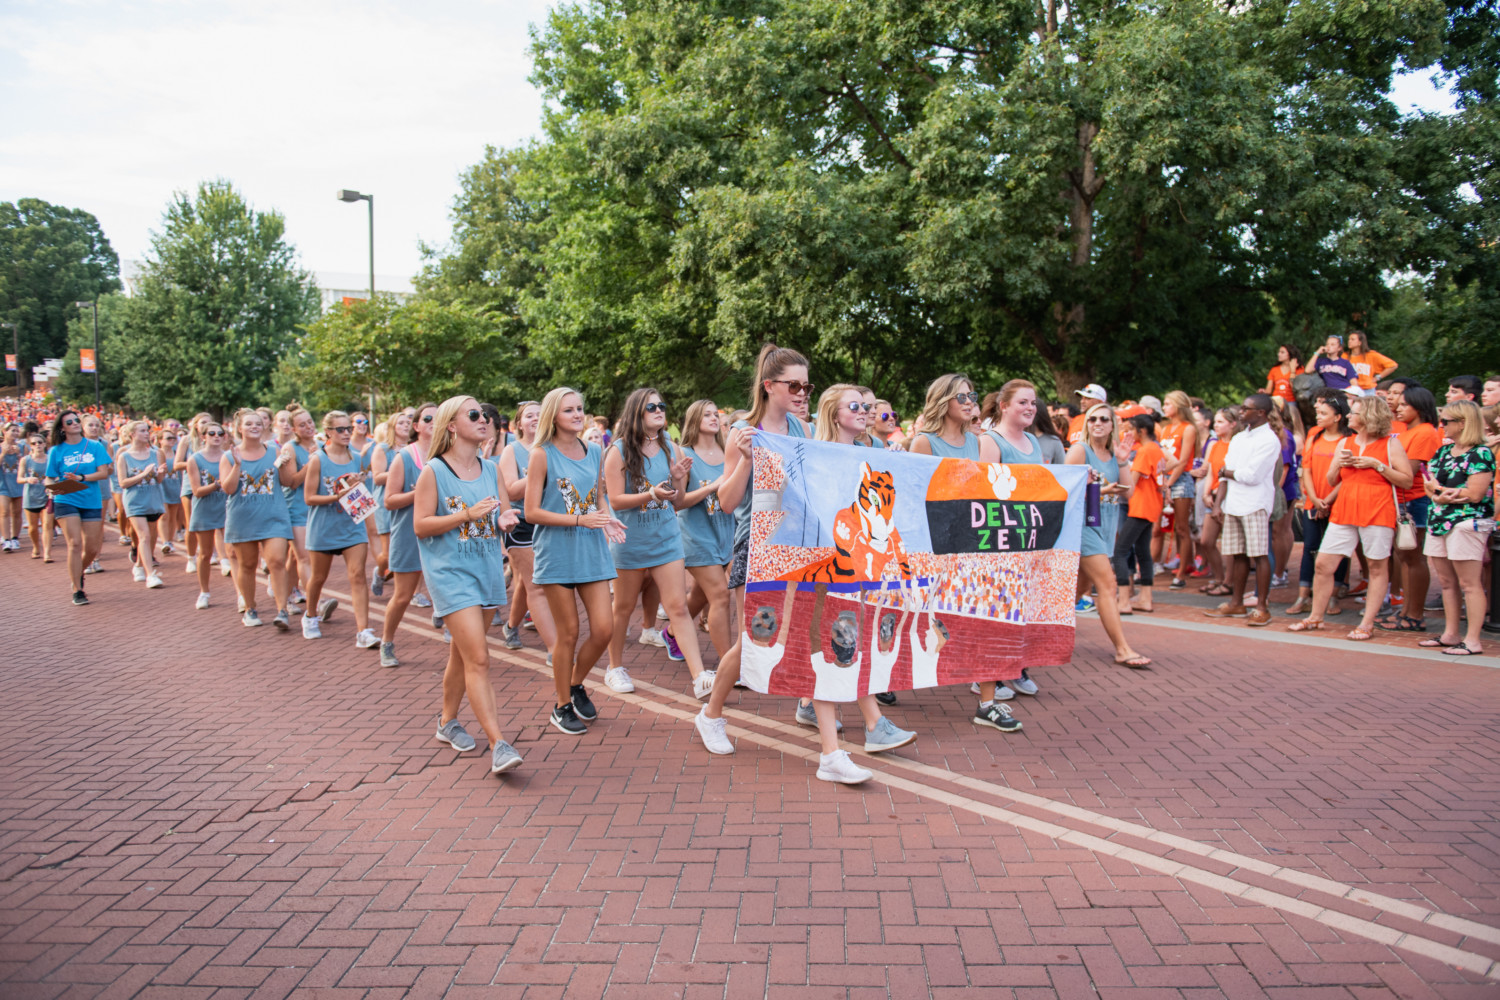 Members of Delta Zeta walk behind a banner during the 2018 First Friday Parade.